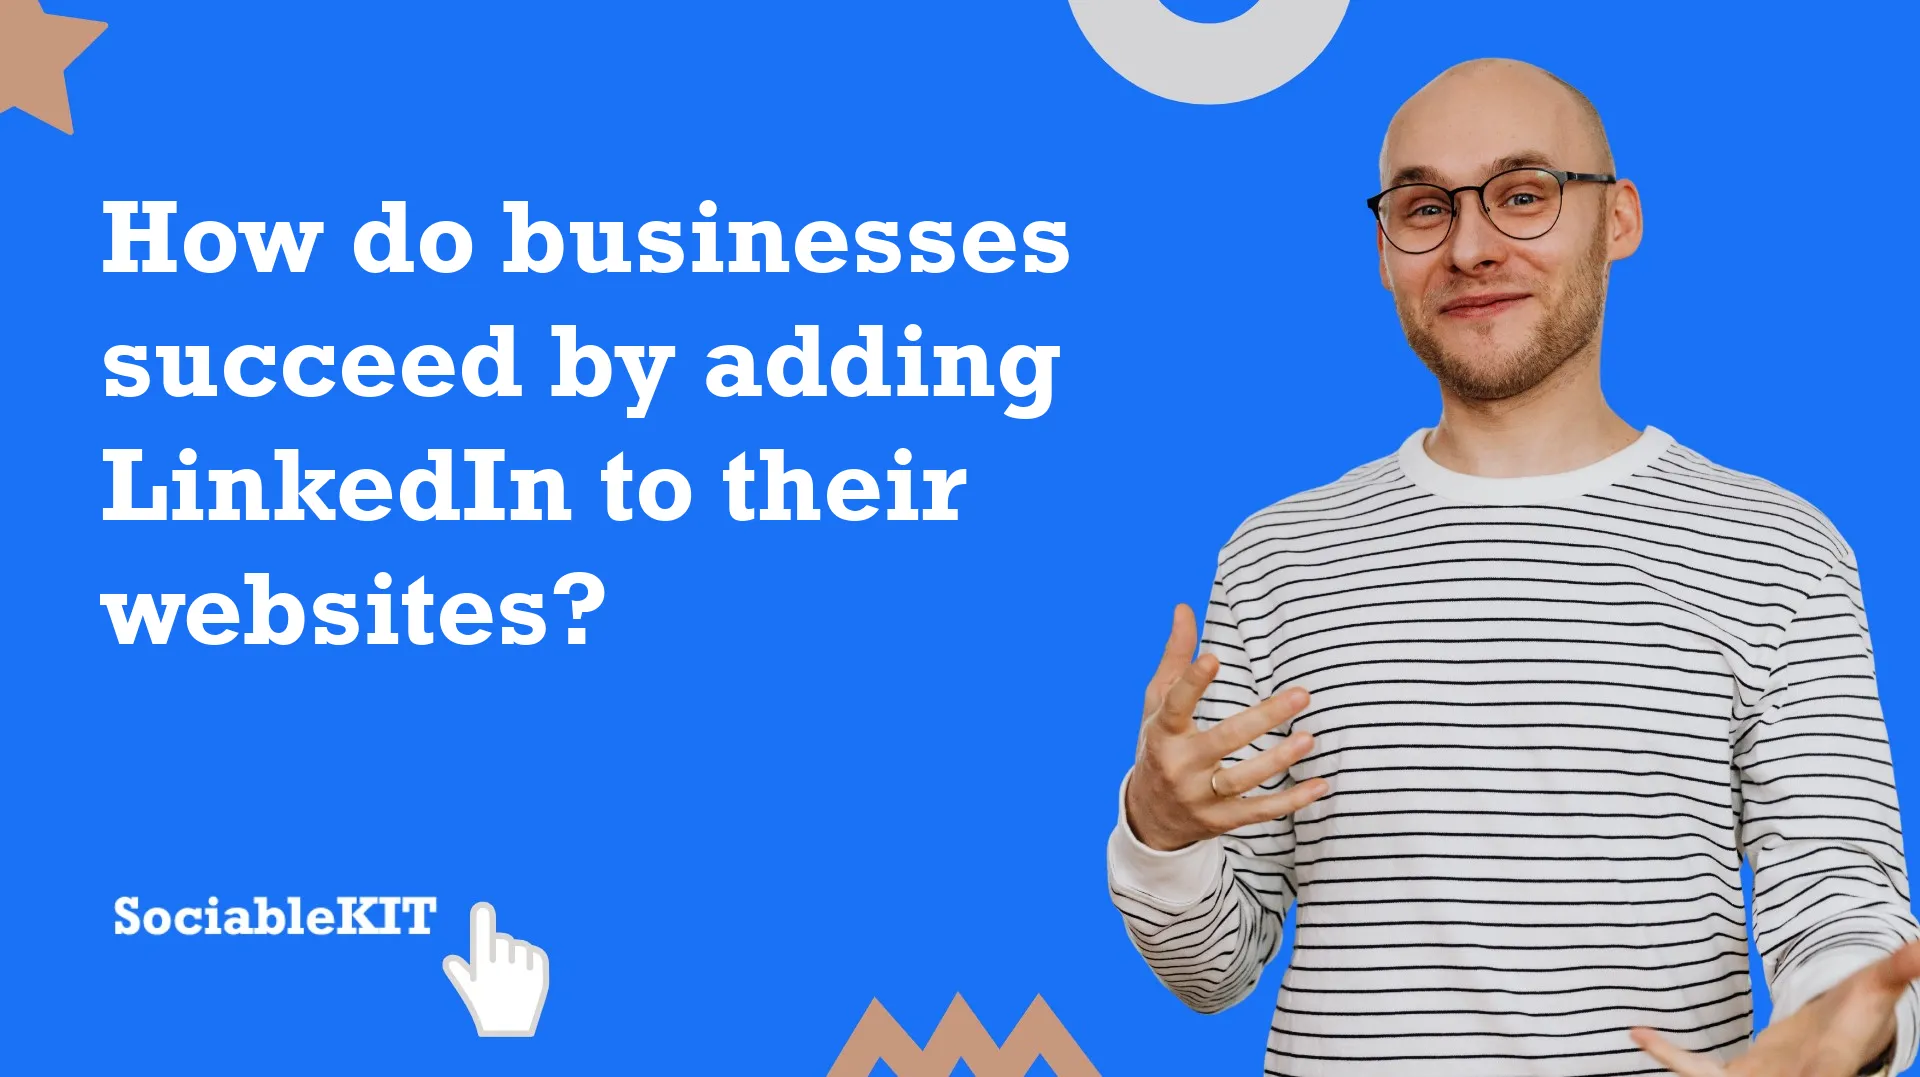 How do businesses succeed by adding LinkedIn to their websites?